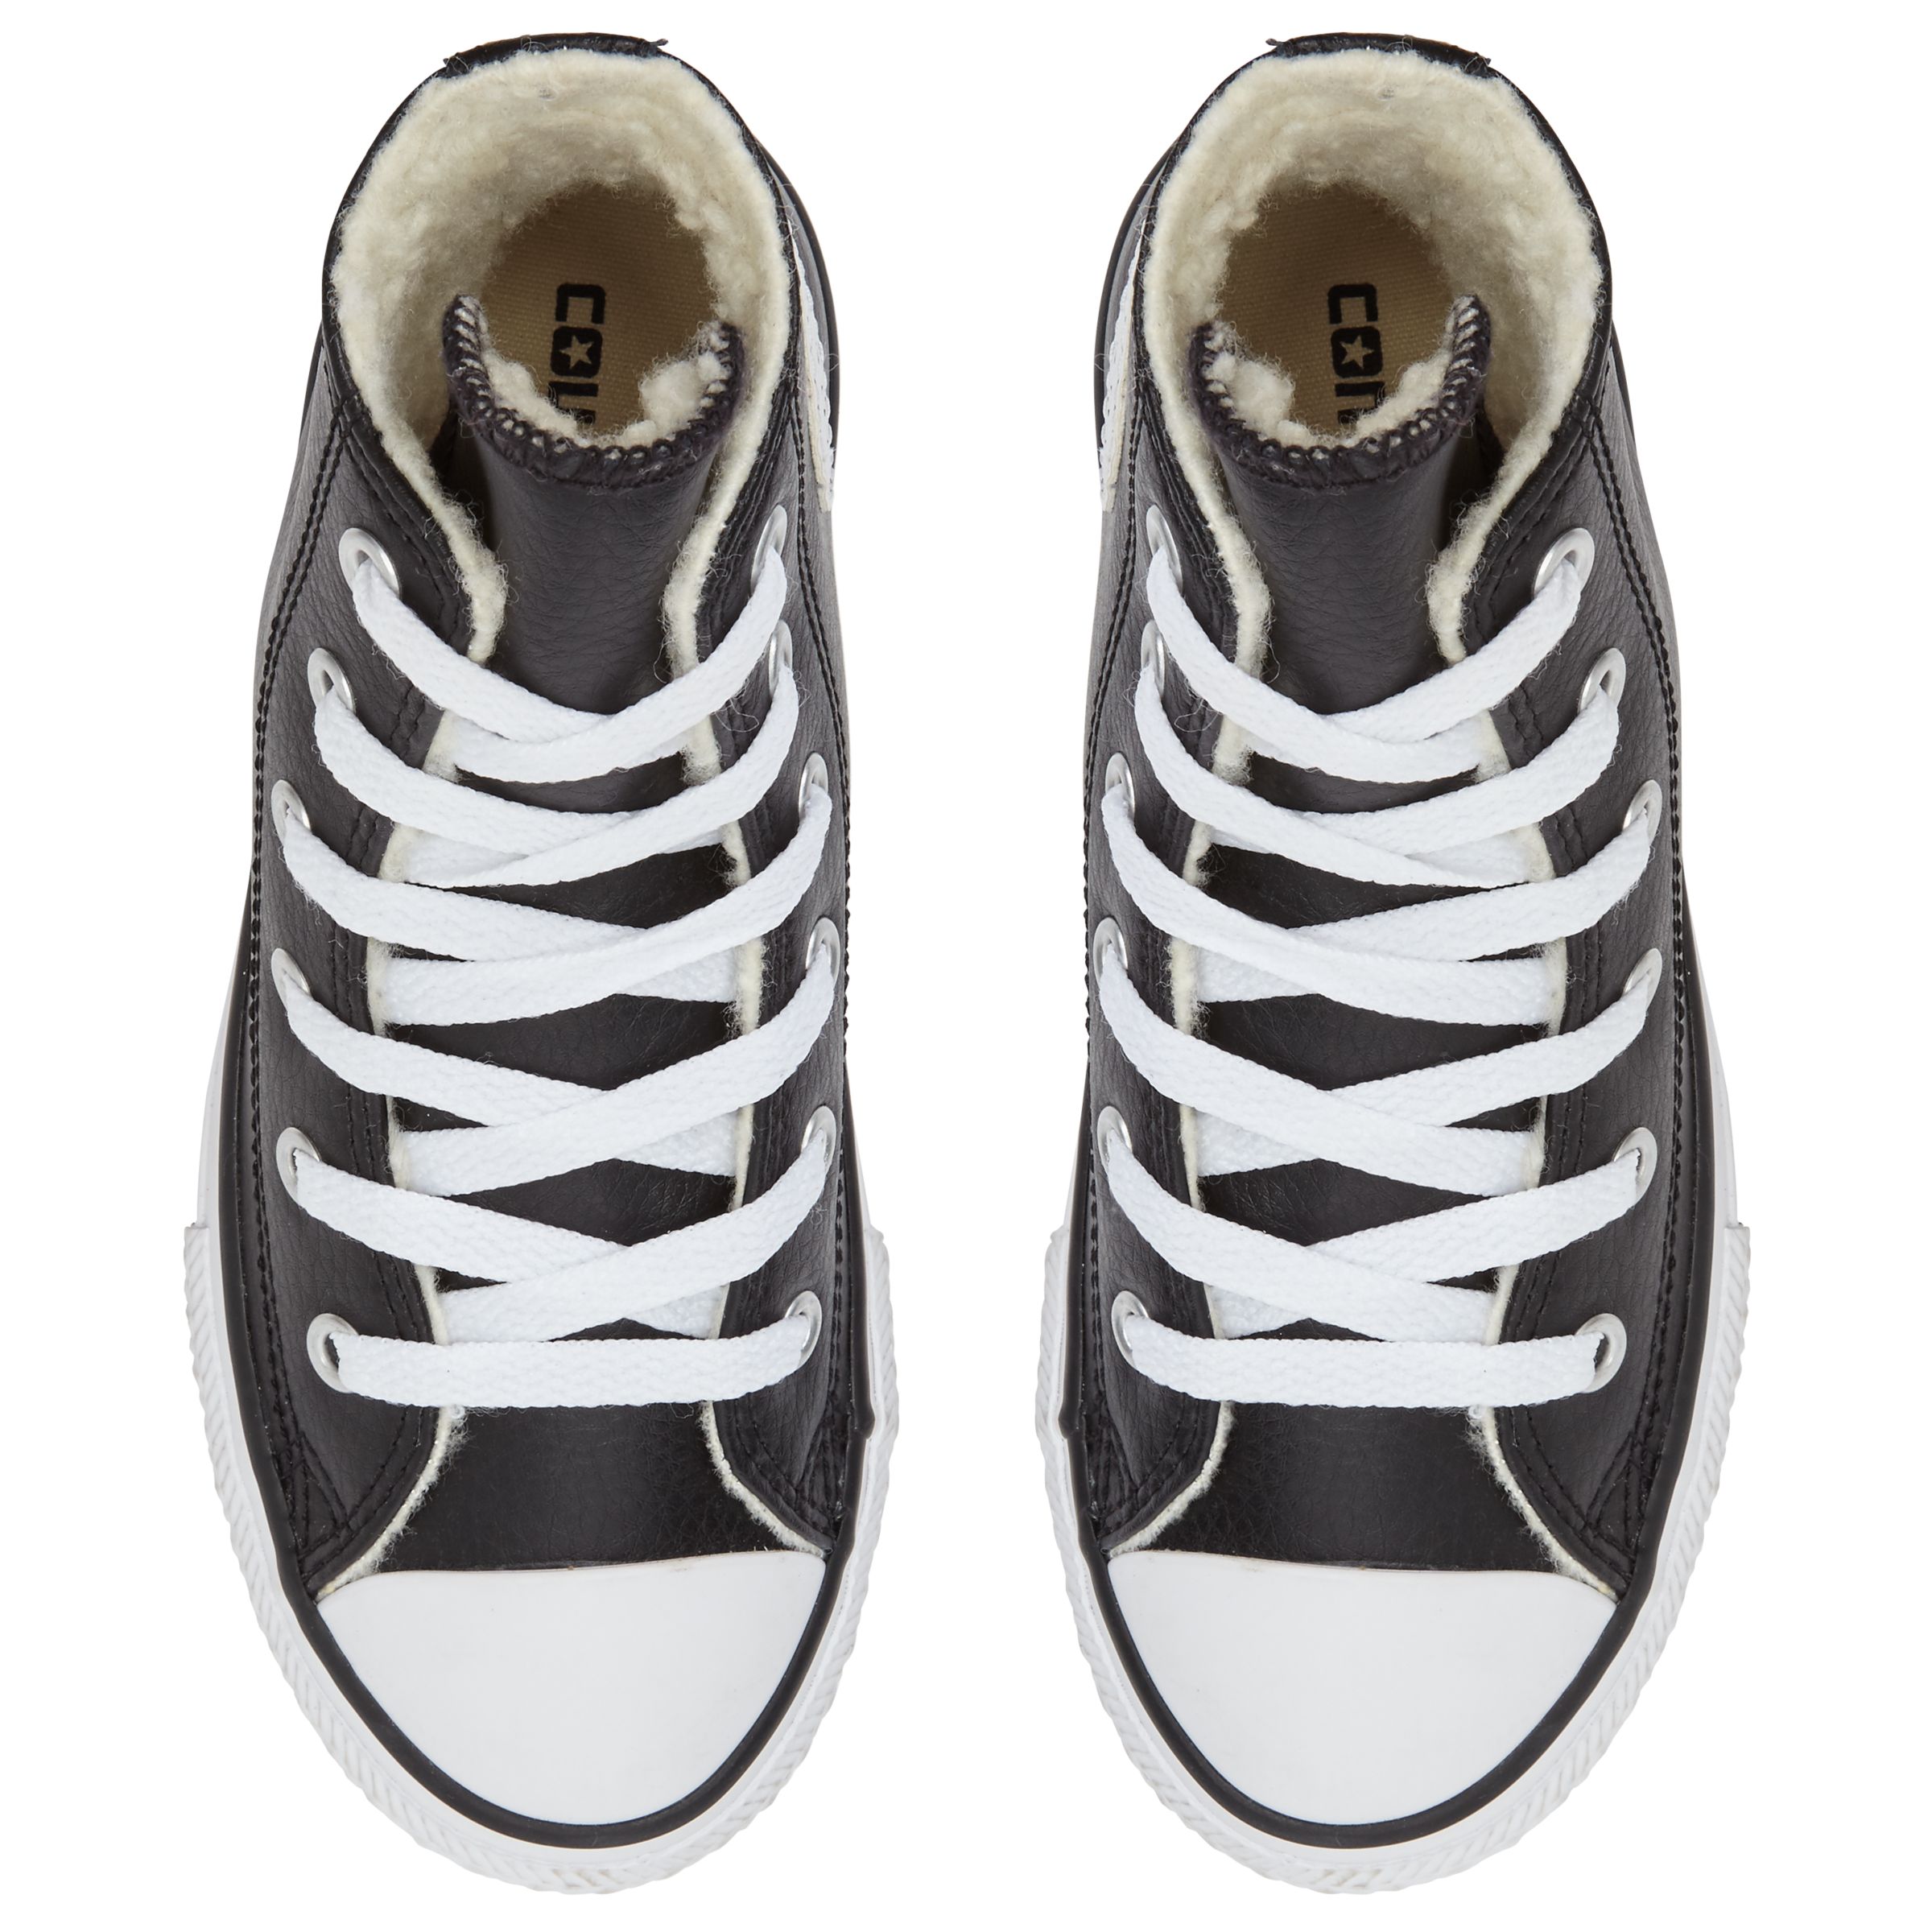 converse chuck taylor fur lined